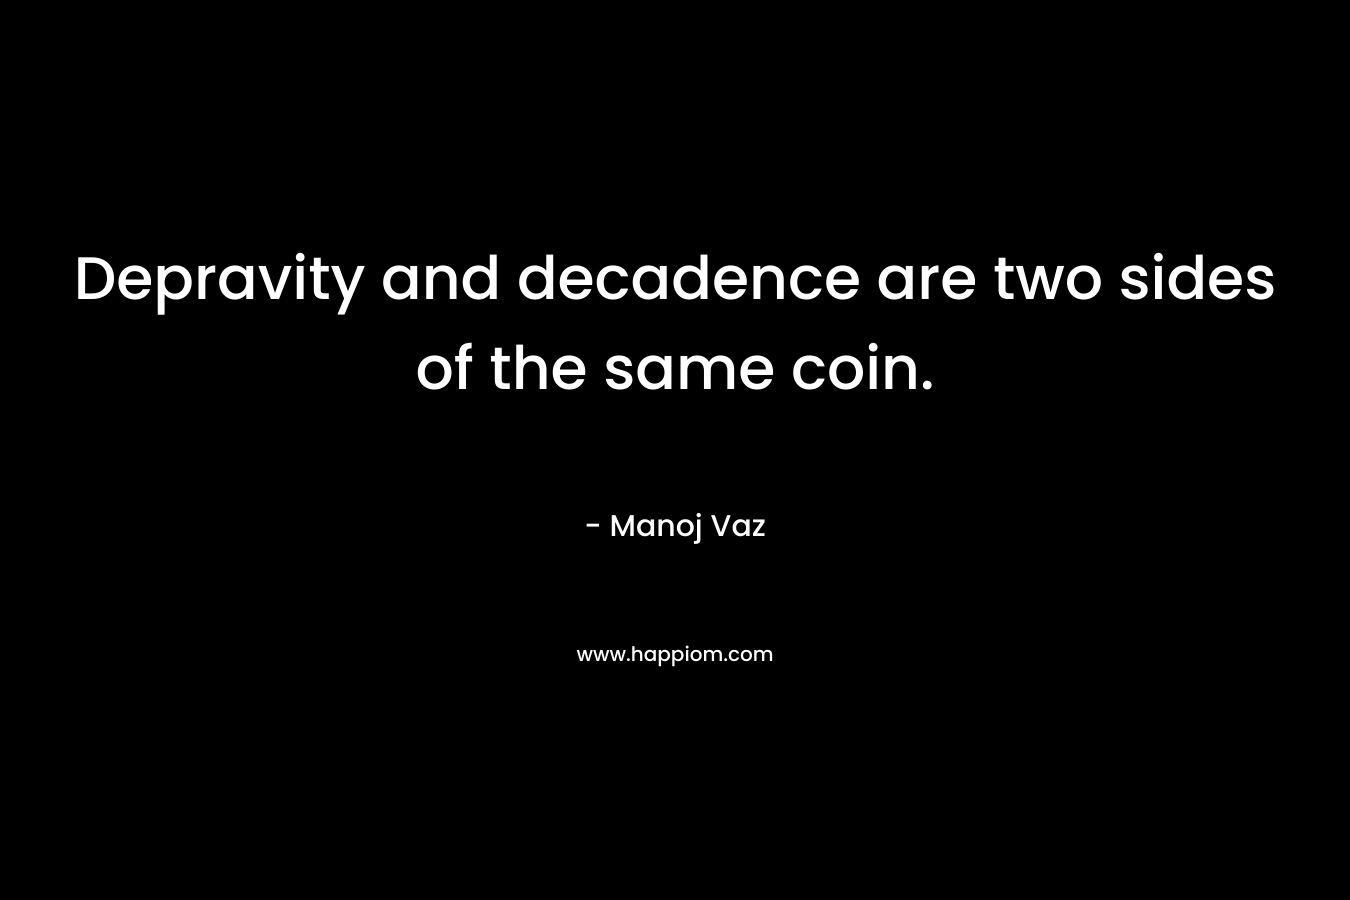 Depravity and decadence are two sides of the same coin. – Manoj Vaz